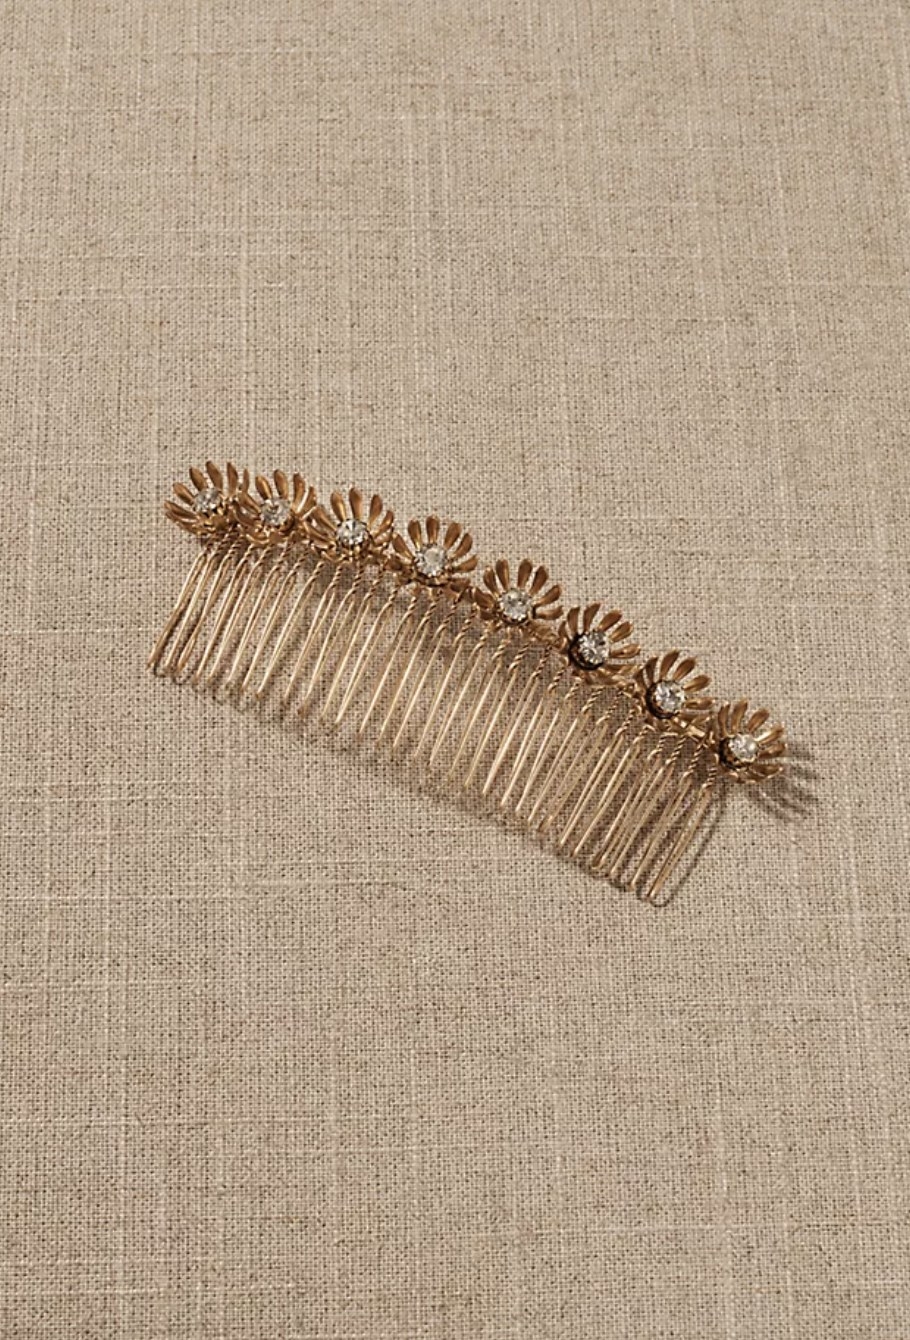 The hold comb has eight gold flowers adorned along the top with a crystal in the center of each one